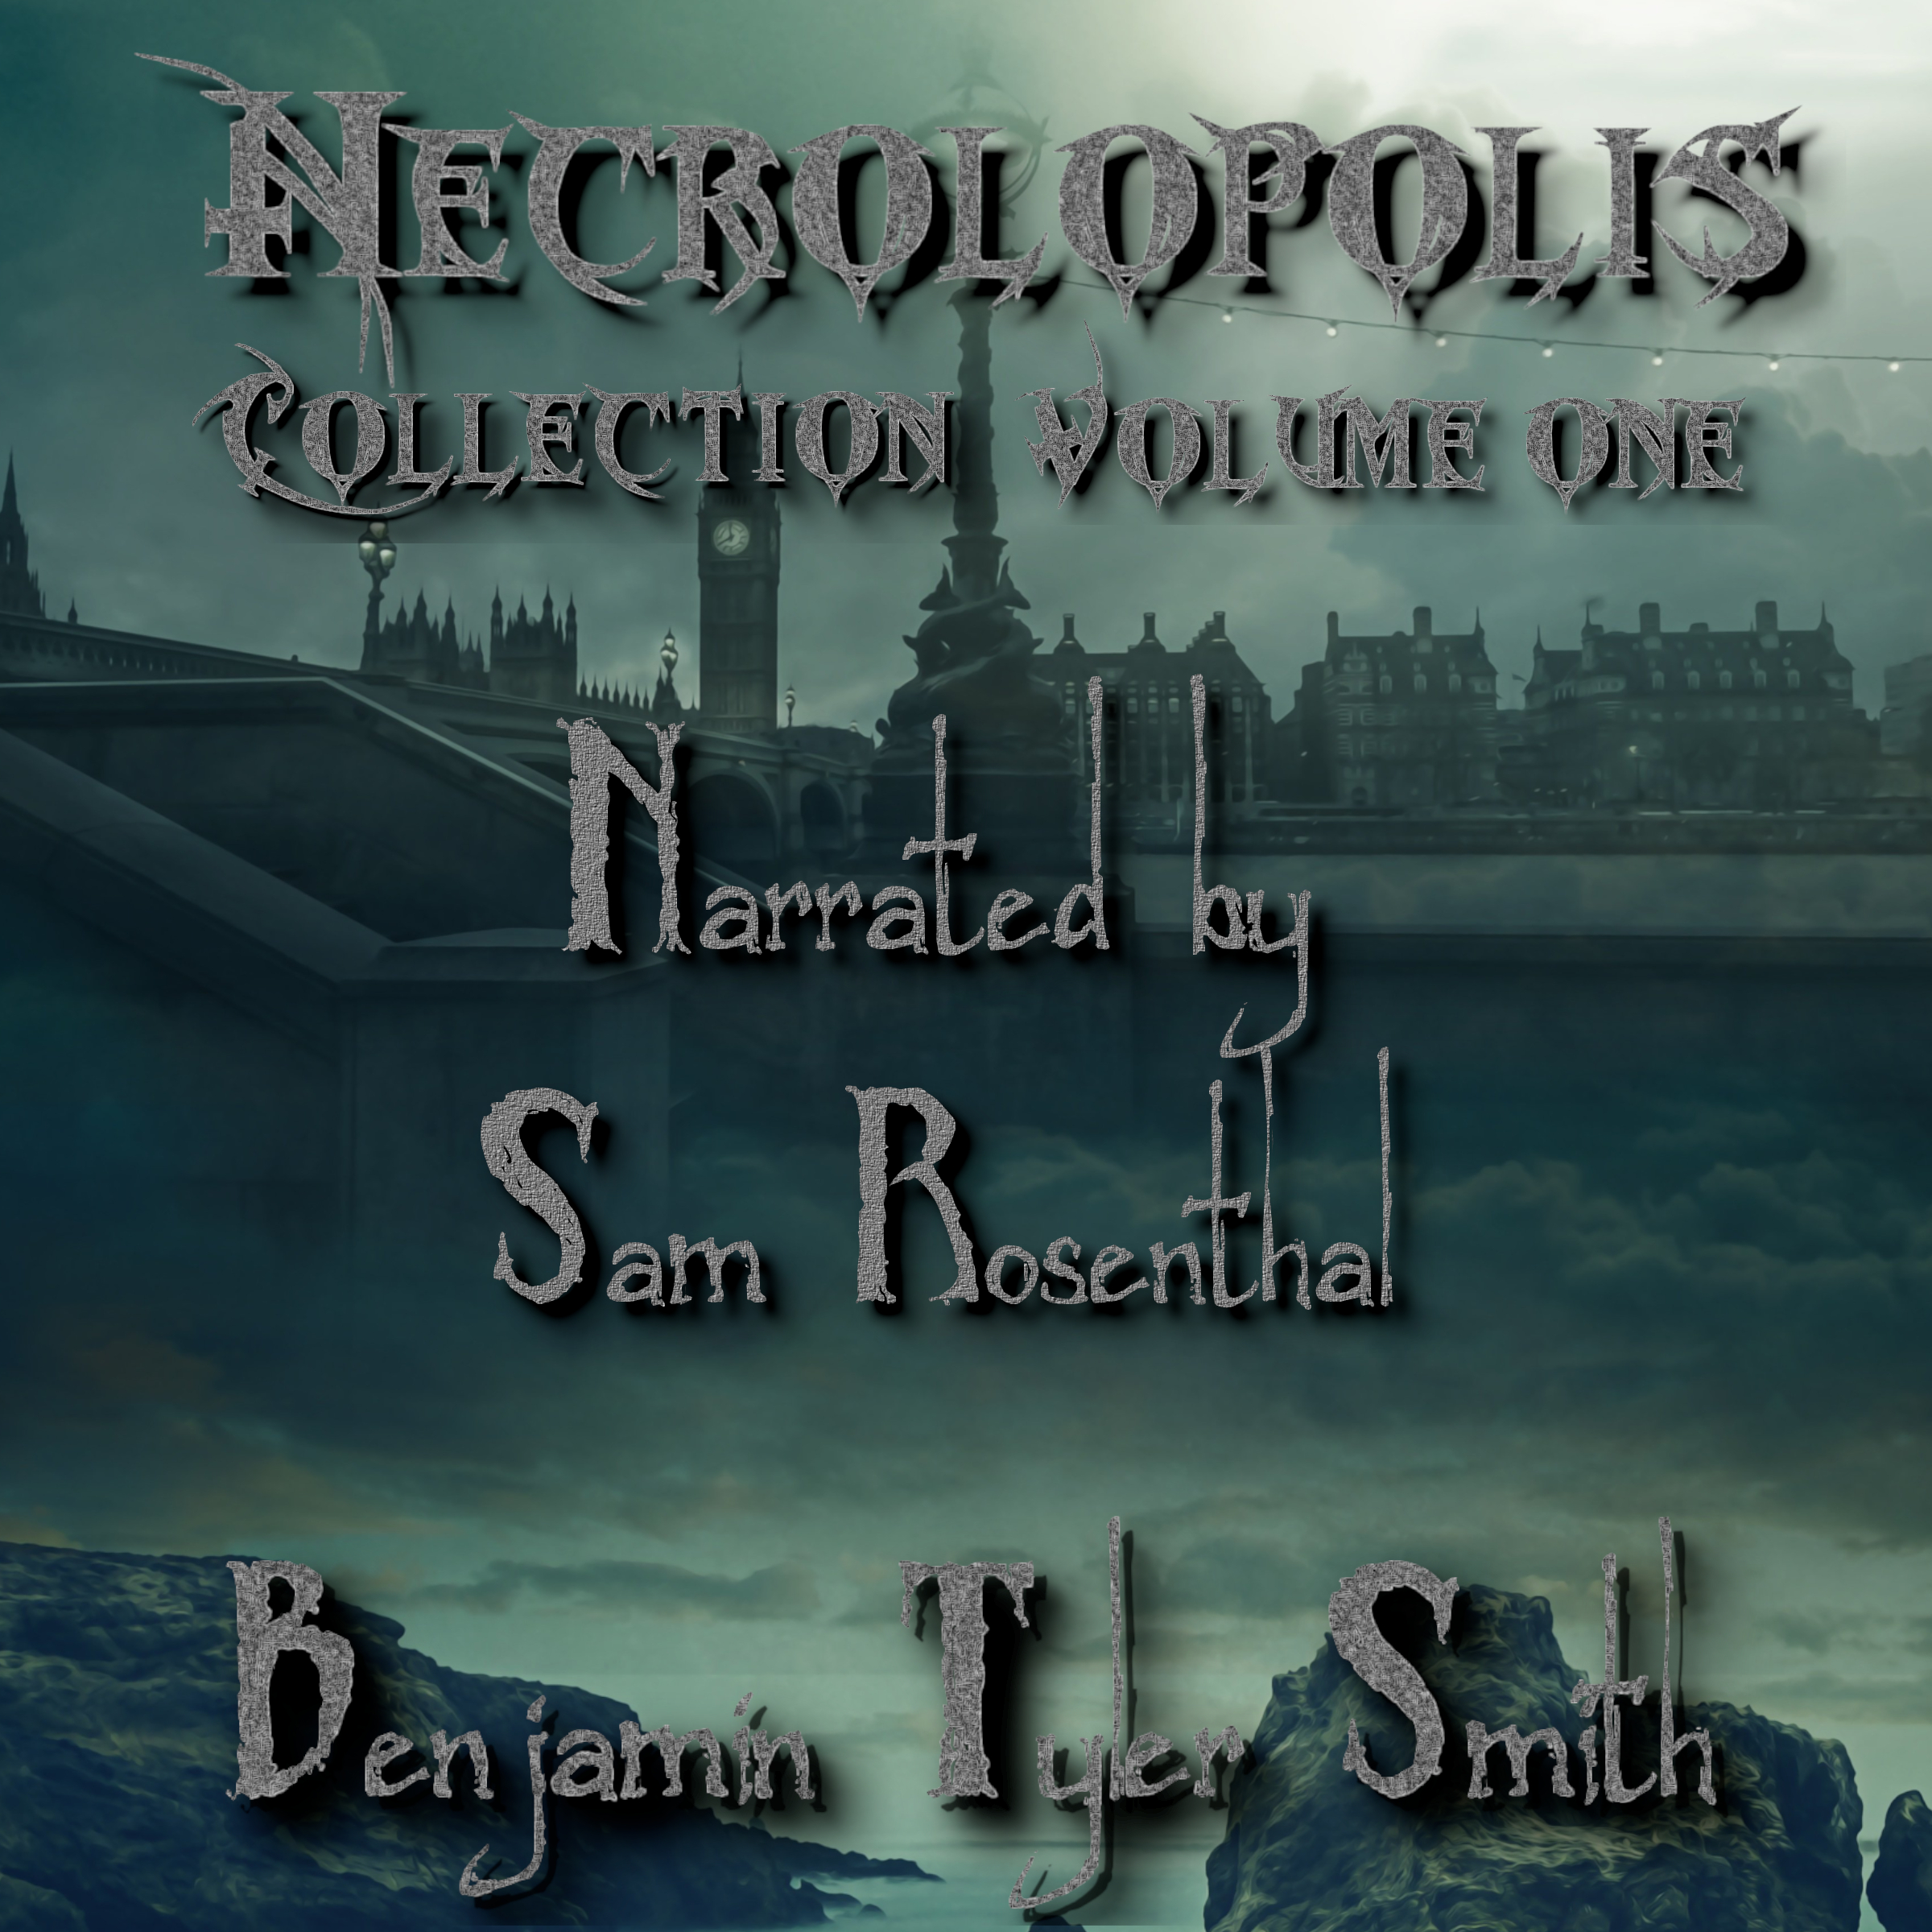 Ever laid awake at night, wondering what happens to one after death? Well, wonder no more! Welcome to Necrolopolis!